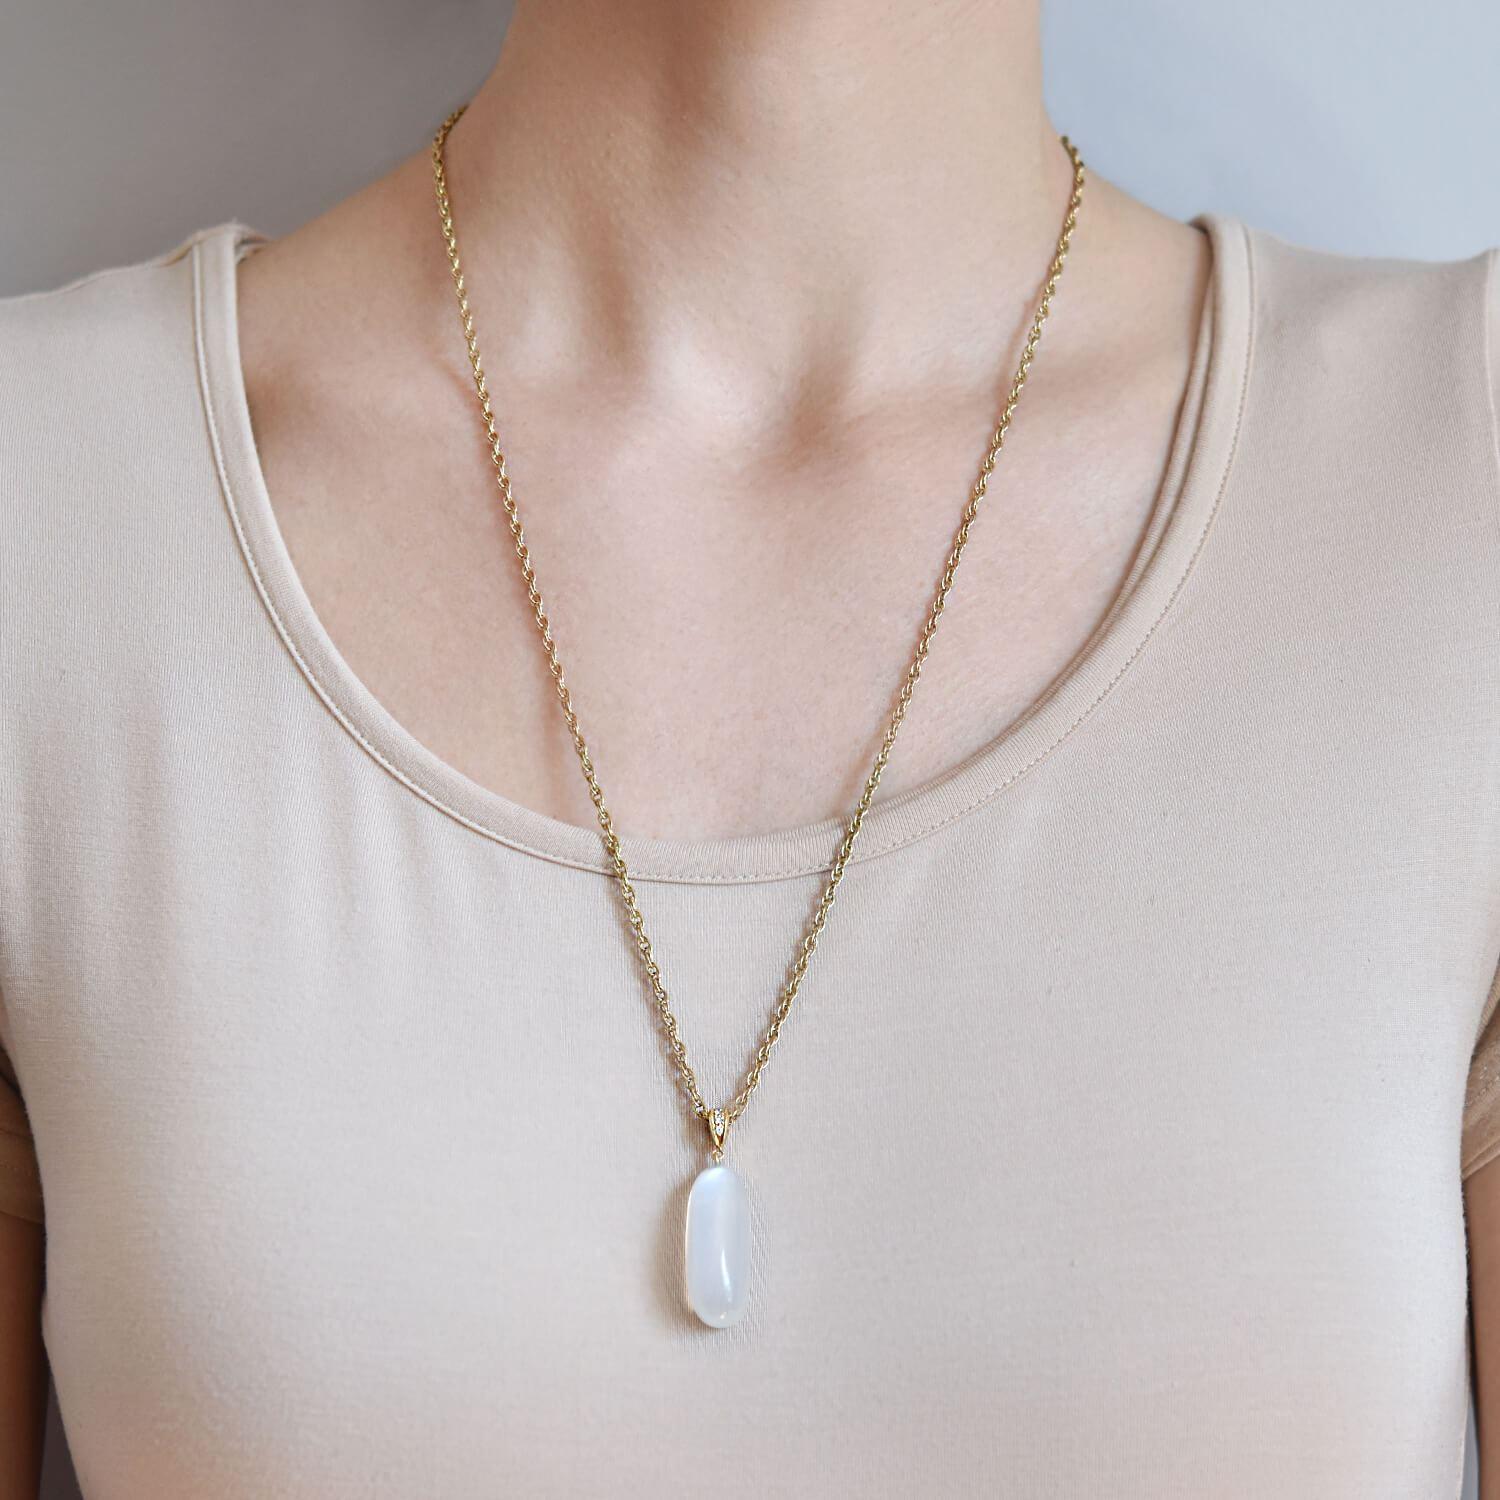 Art Nouveau Large Moonstone Drop Pendant with Modern Chain Necklace In Good Condition For Sale In Narberth, PA